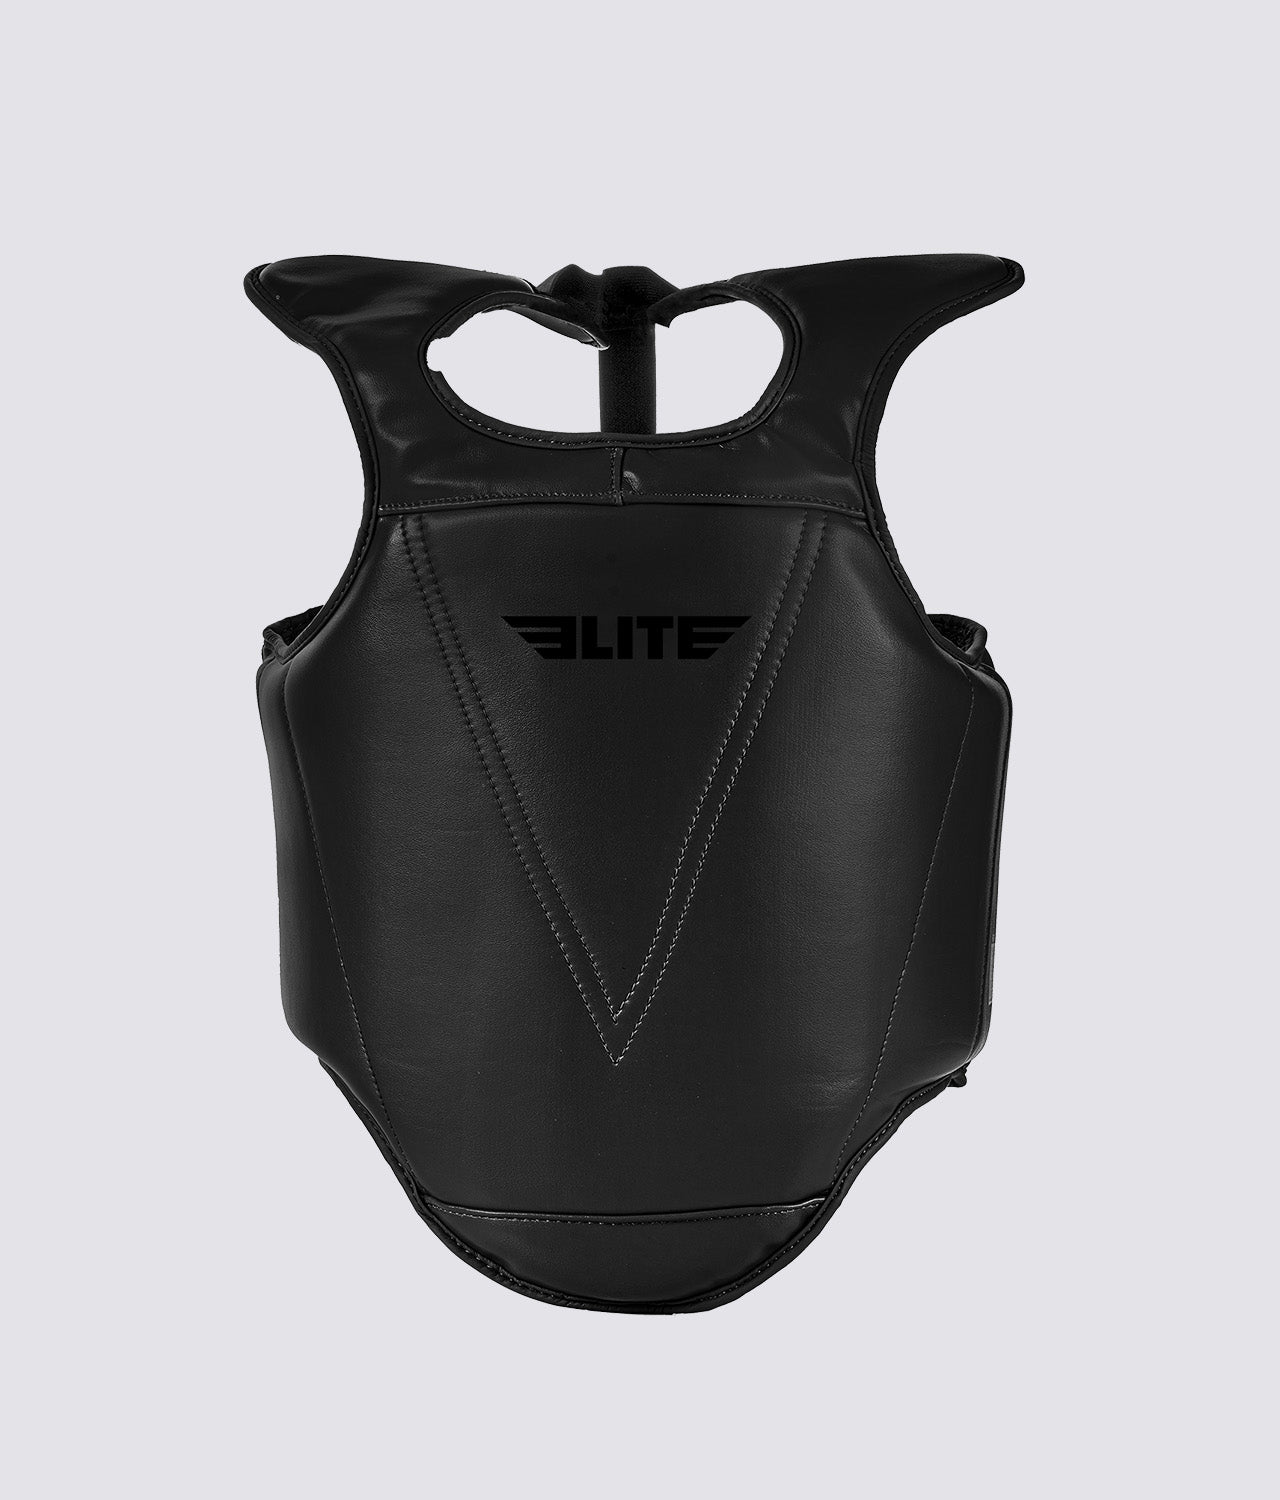 Elite Sports Kids' Black MMA Chest Guard : 4 to 8 Years